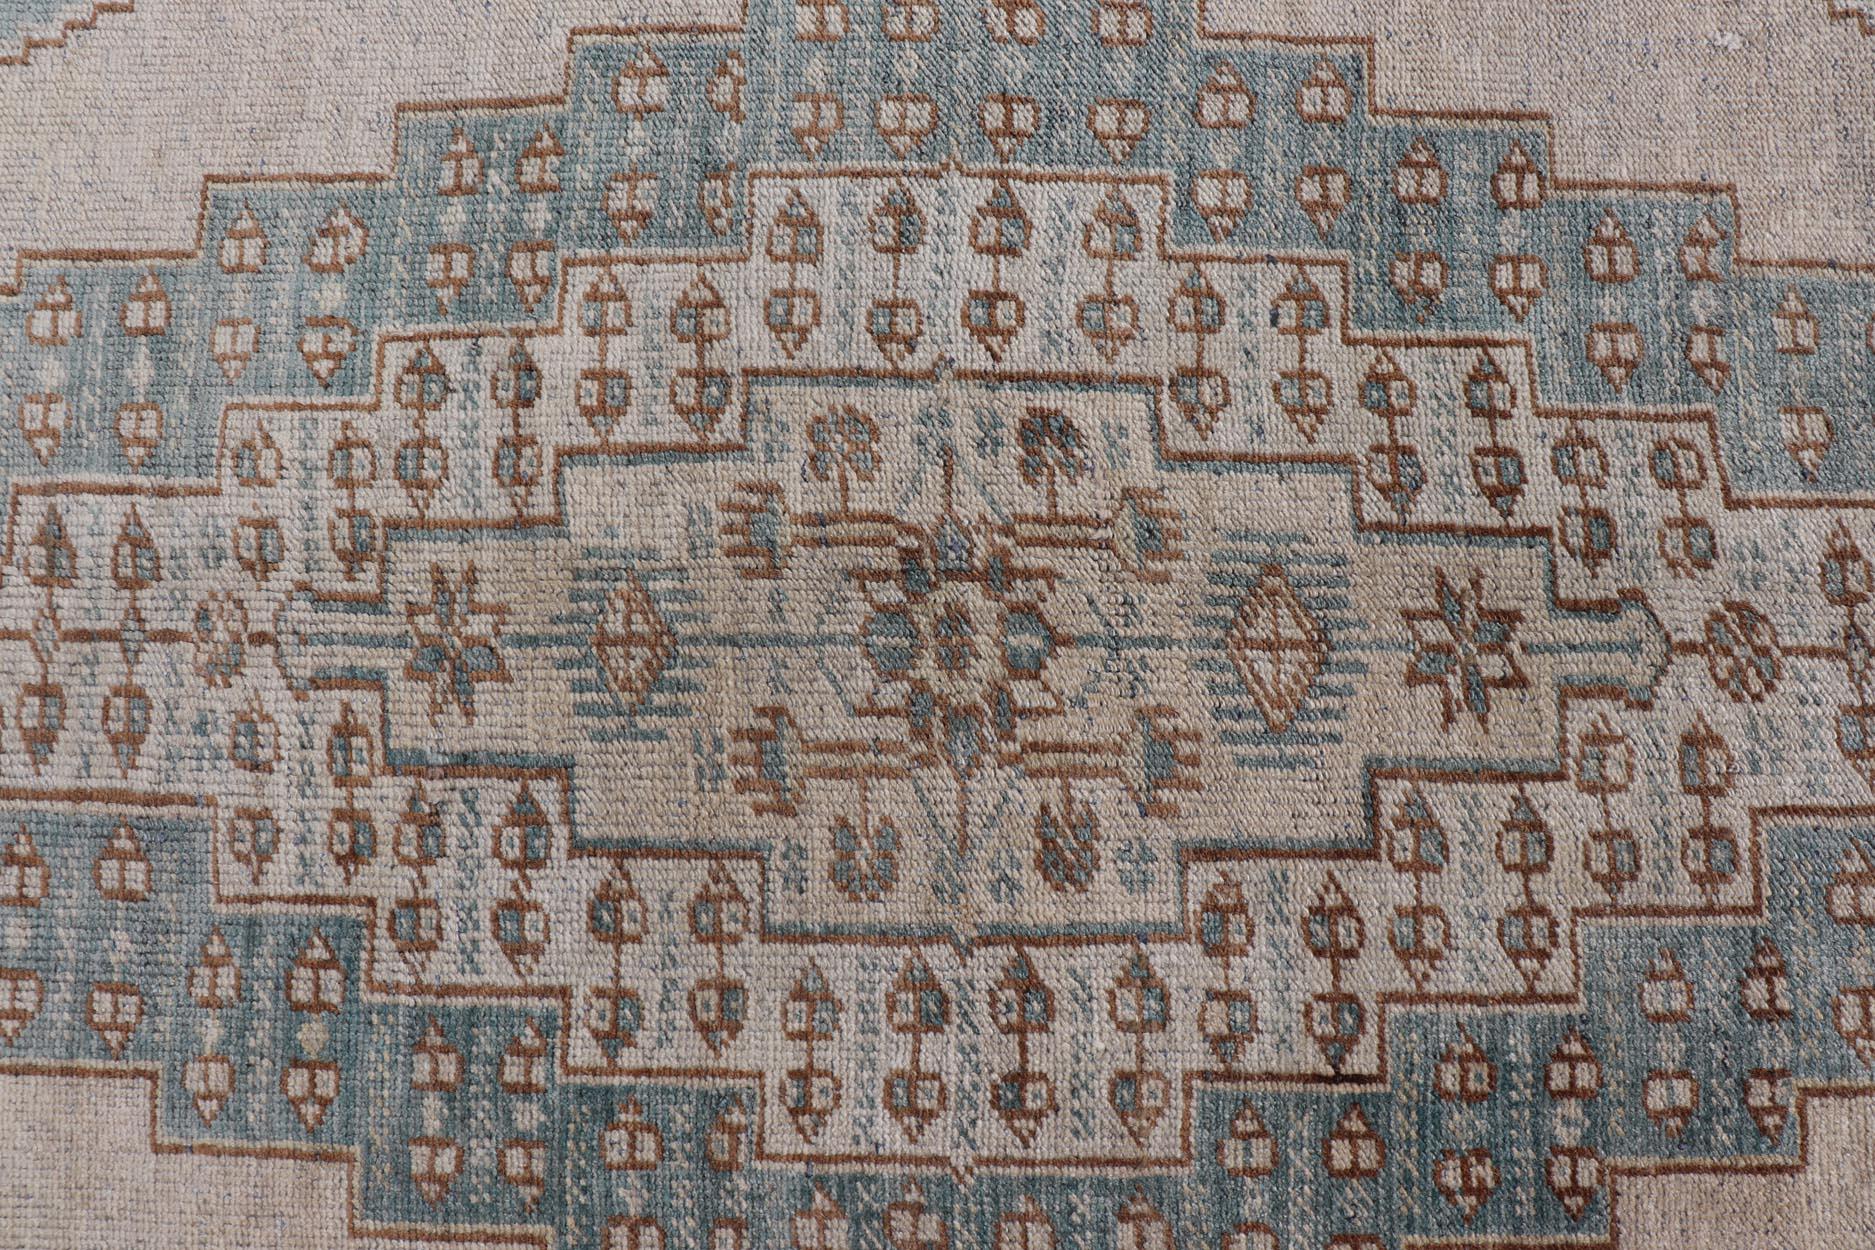 Vintage Oushak Rug in Muted Taupe, Soft Blue, Tan and Light Brown In Good Condition For Sale In Atlanta, GA